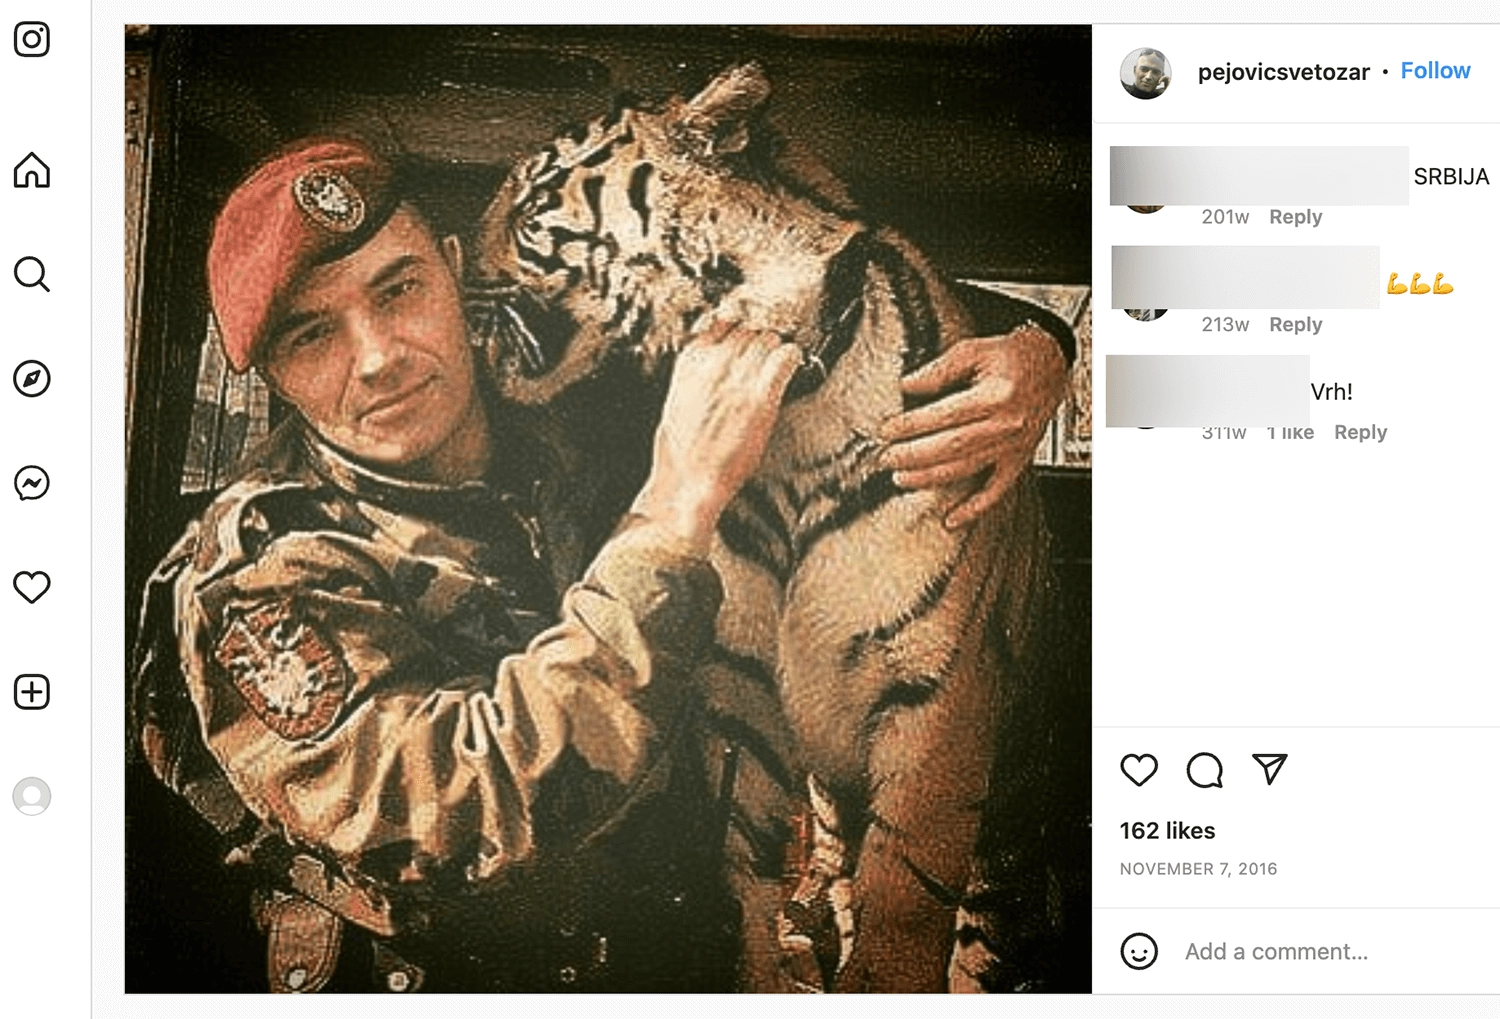 Svetozar Pejović, a former member of Arkan's Tigers, poses with a tiger in an undated image posted on his Instagram.